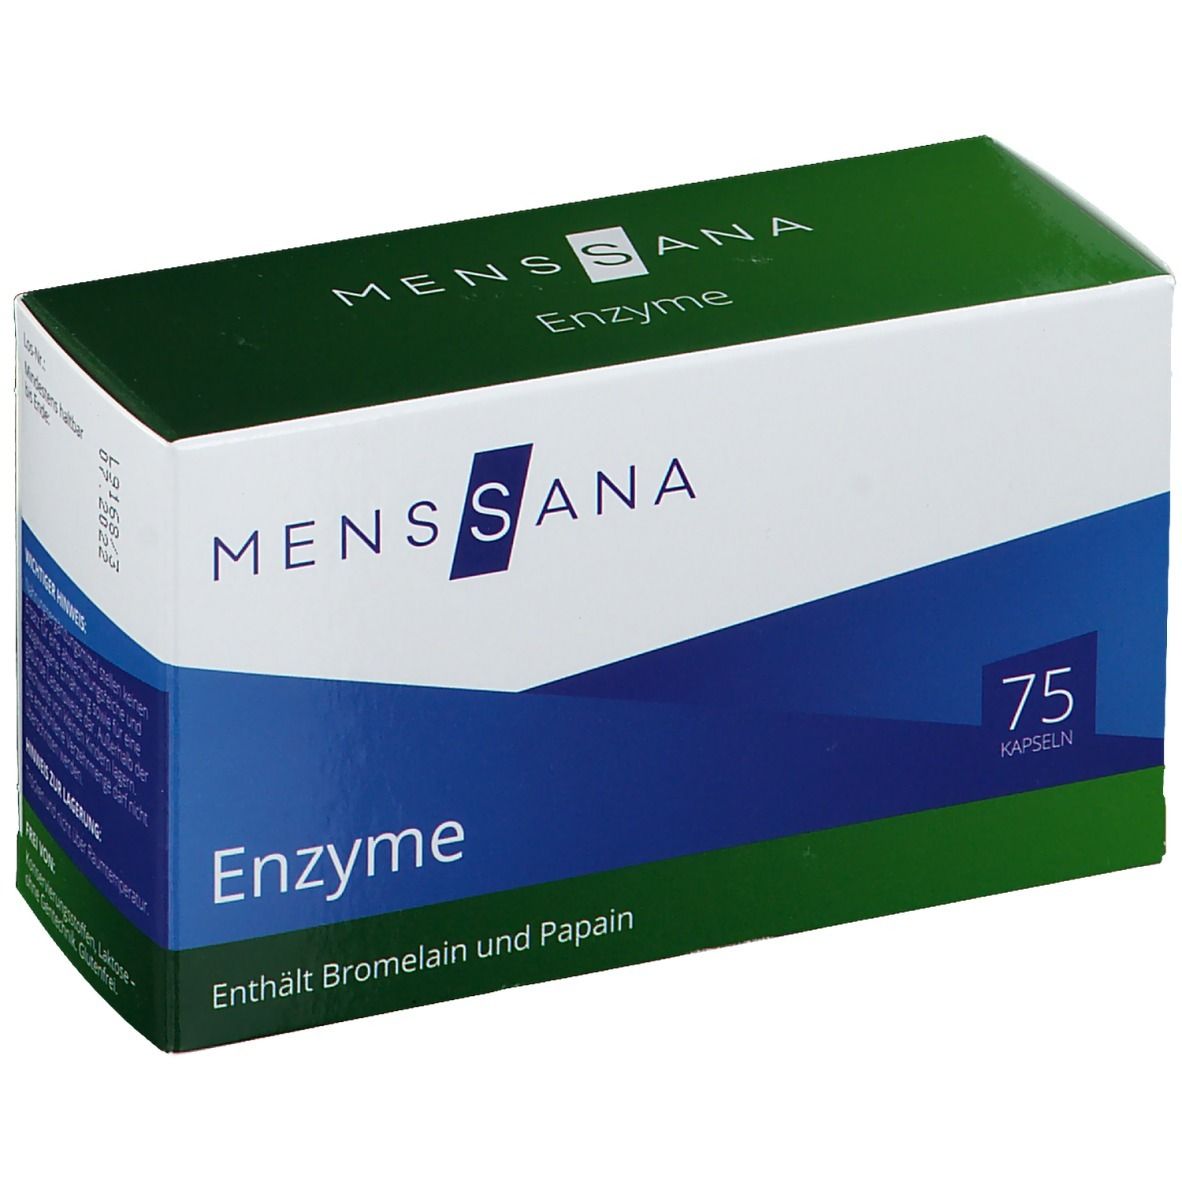 Image of MensSana Enzyme